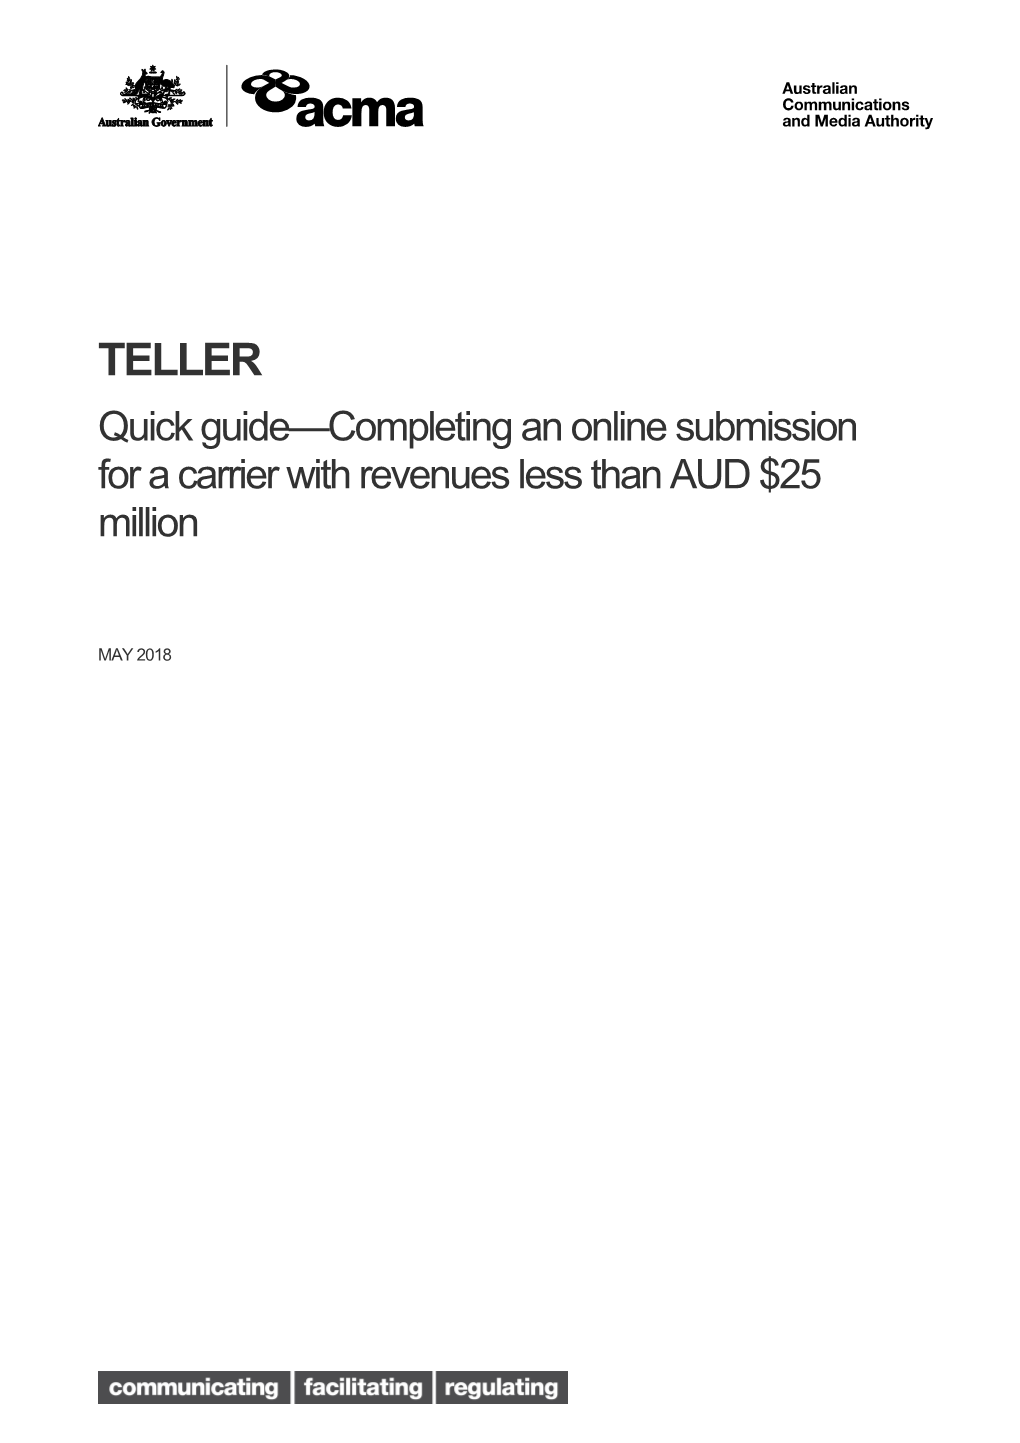 Quick Guide Completing an Online Submission for a Carrier with Revenues Less Than AUD$25 Million